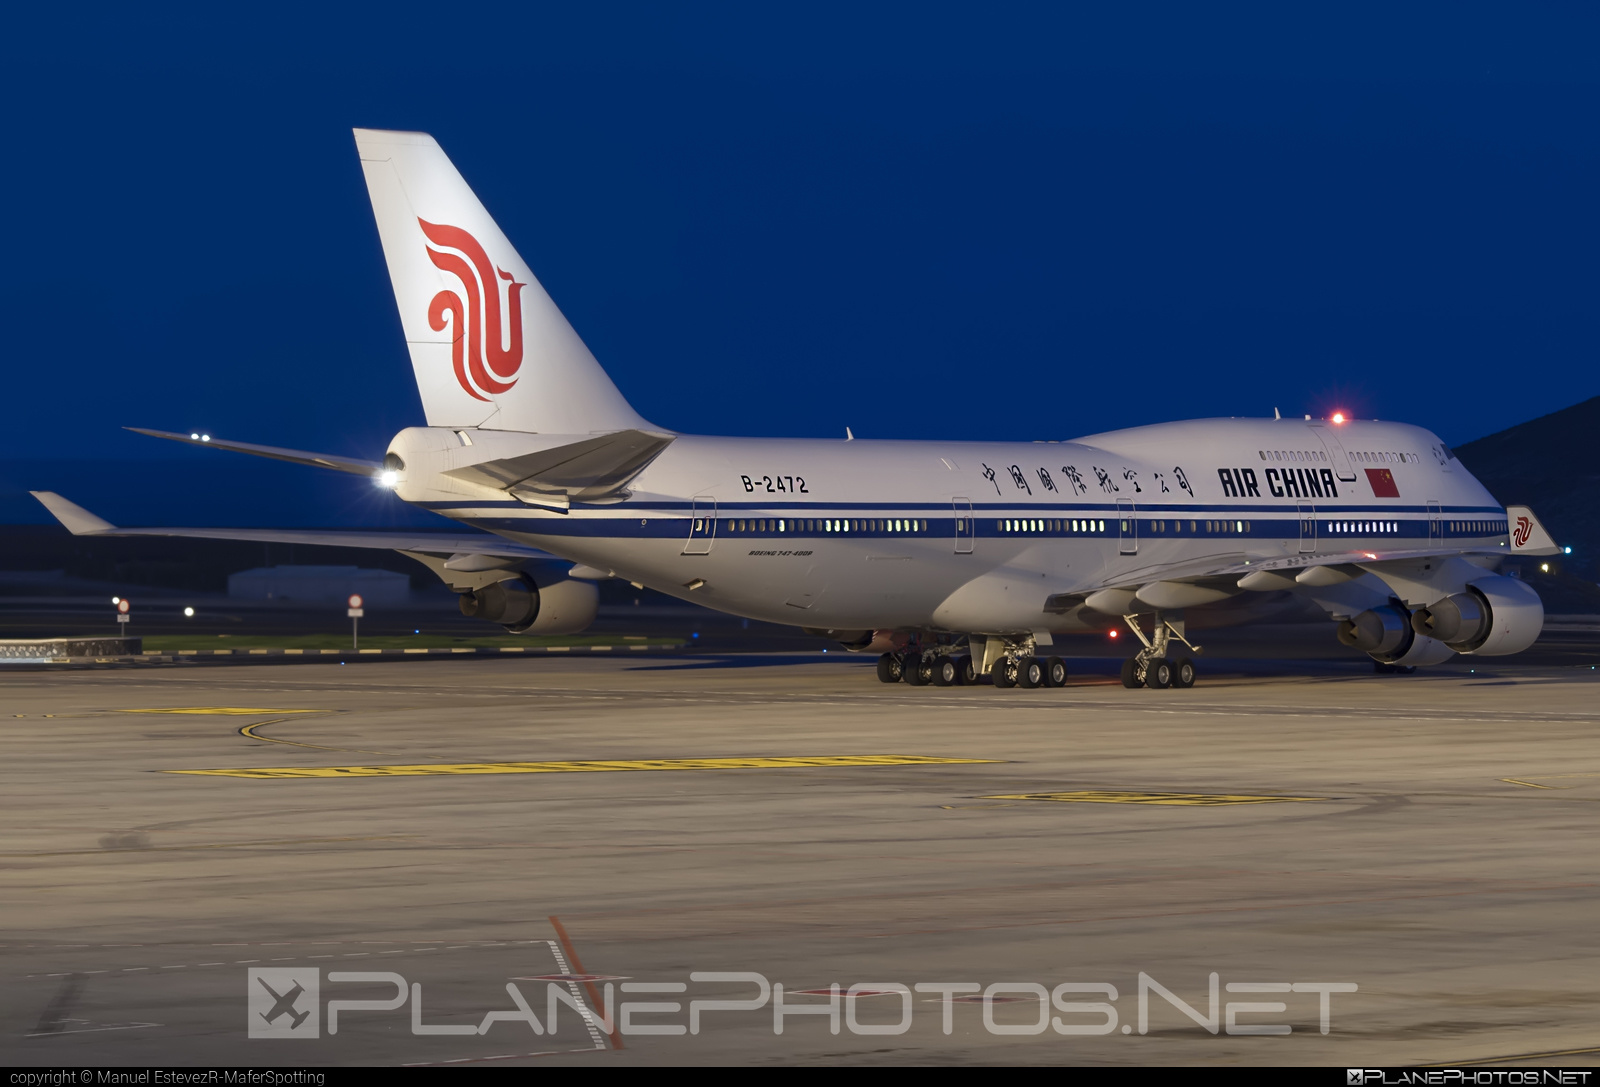 Boeing 747-400 - B-2472 operated by Air China #airchina #b747 #boeing #boeing747 #jumbo